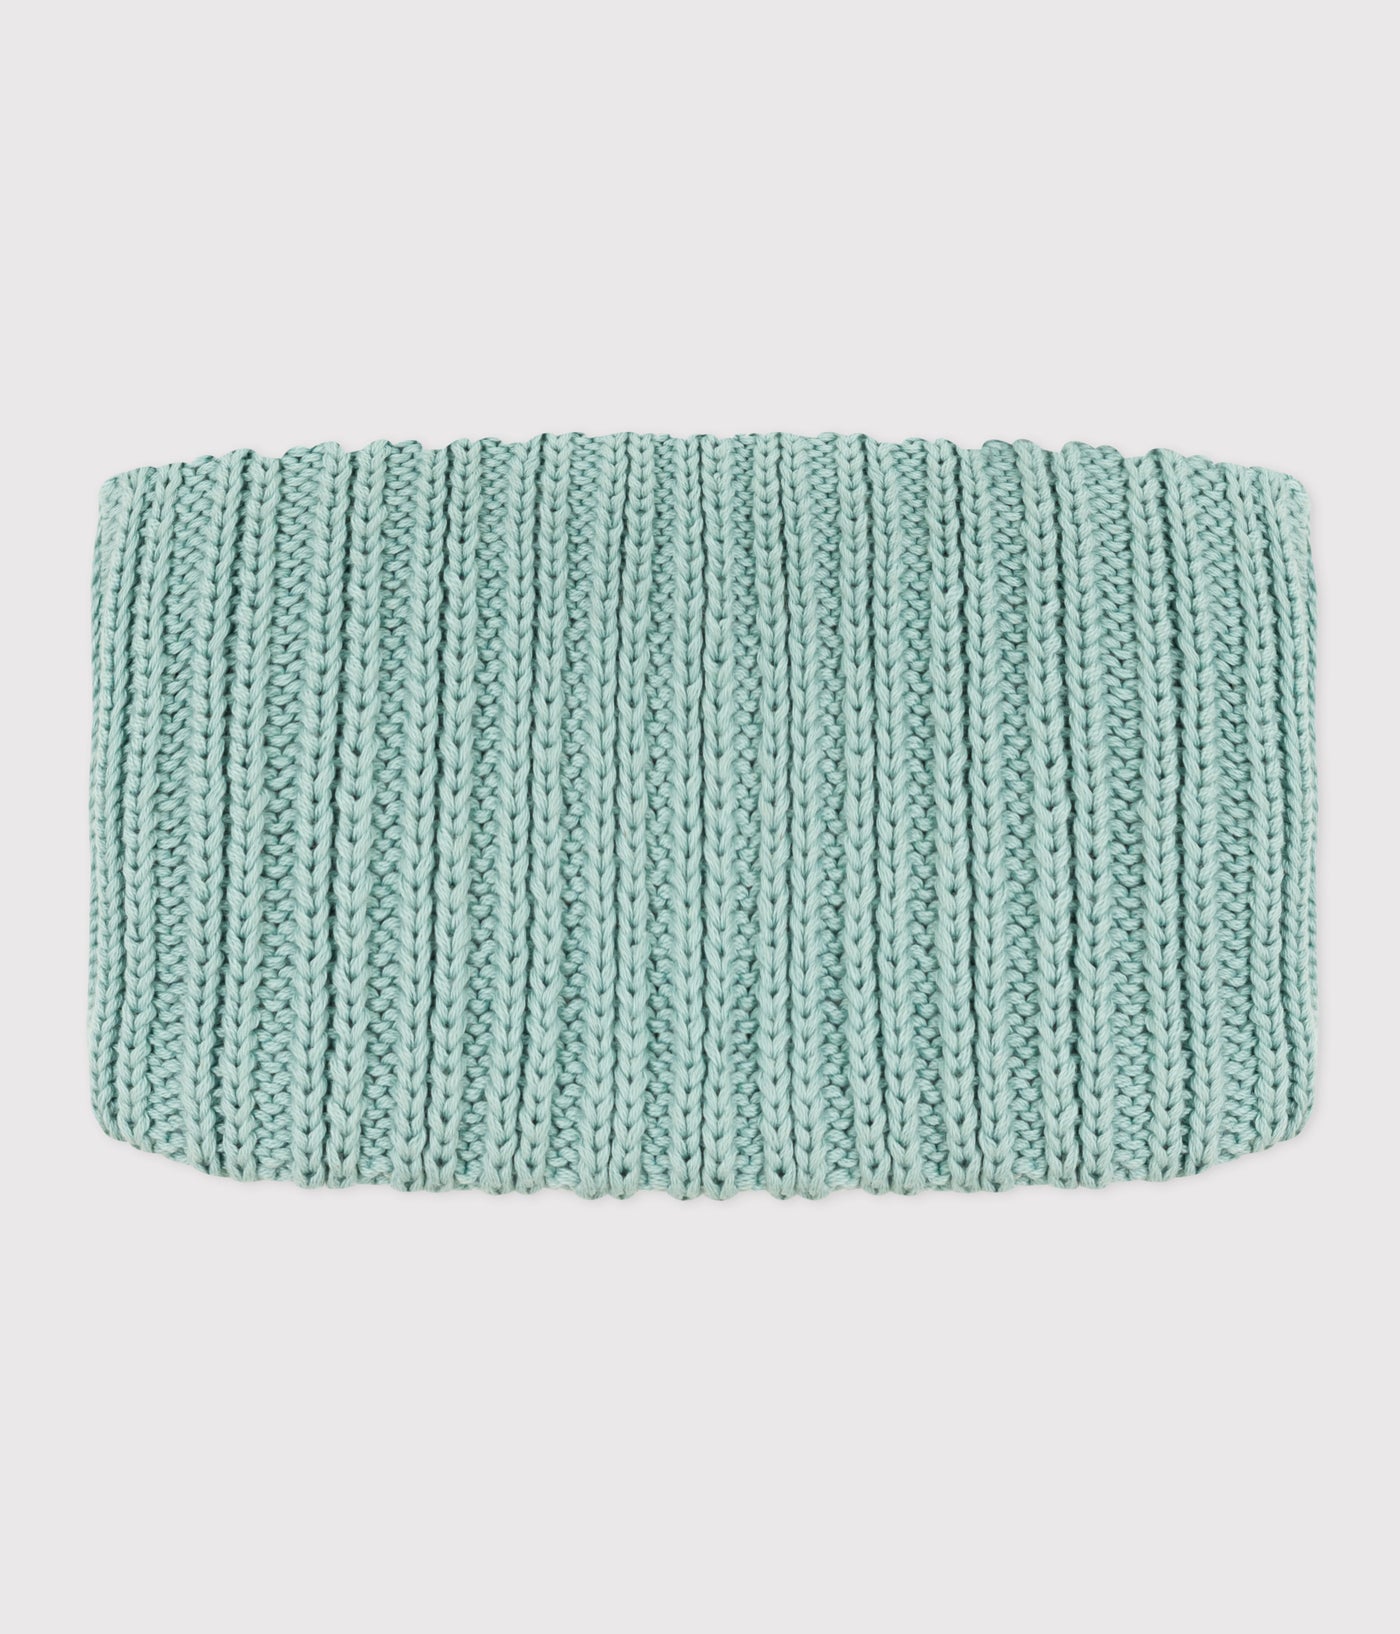 UNISEX FLEECE-LINED KNITTED SNOOD